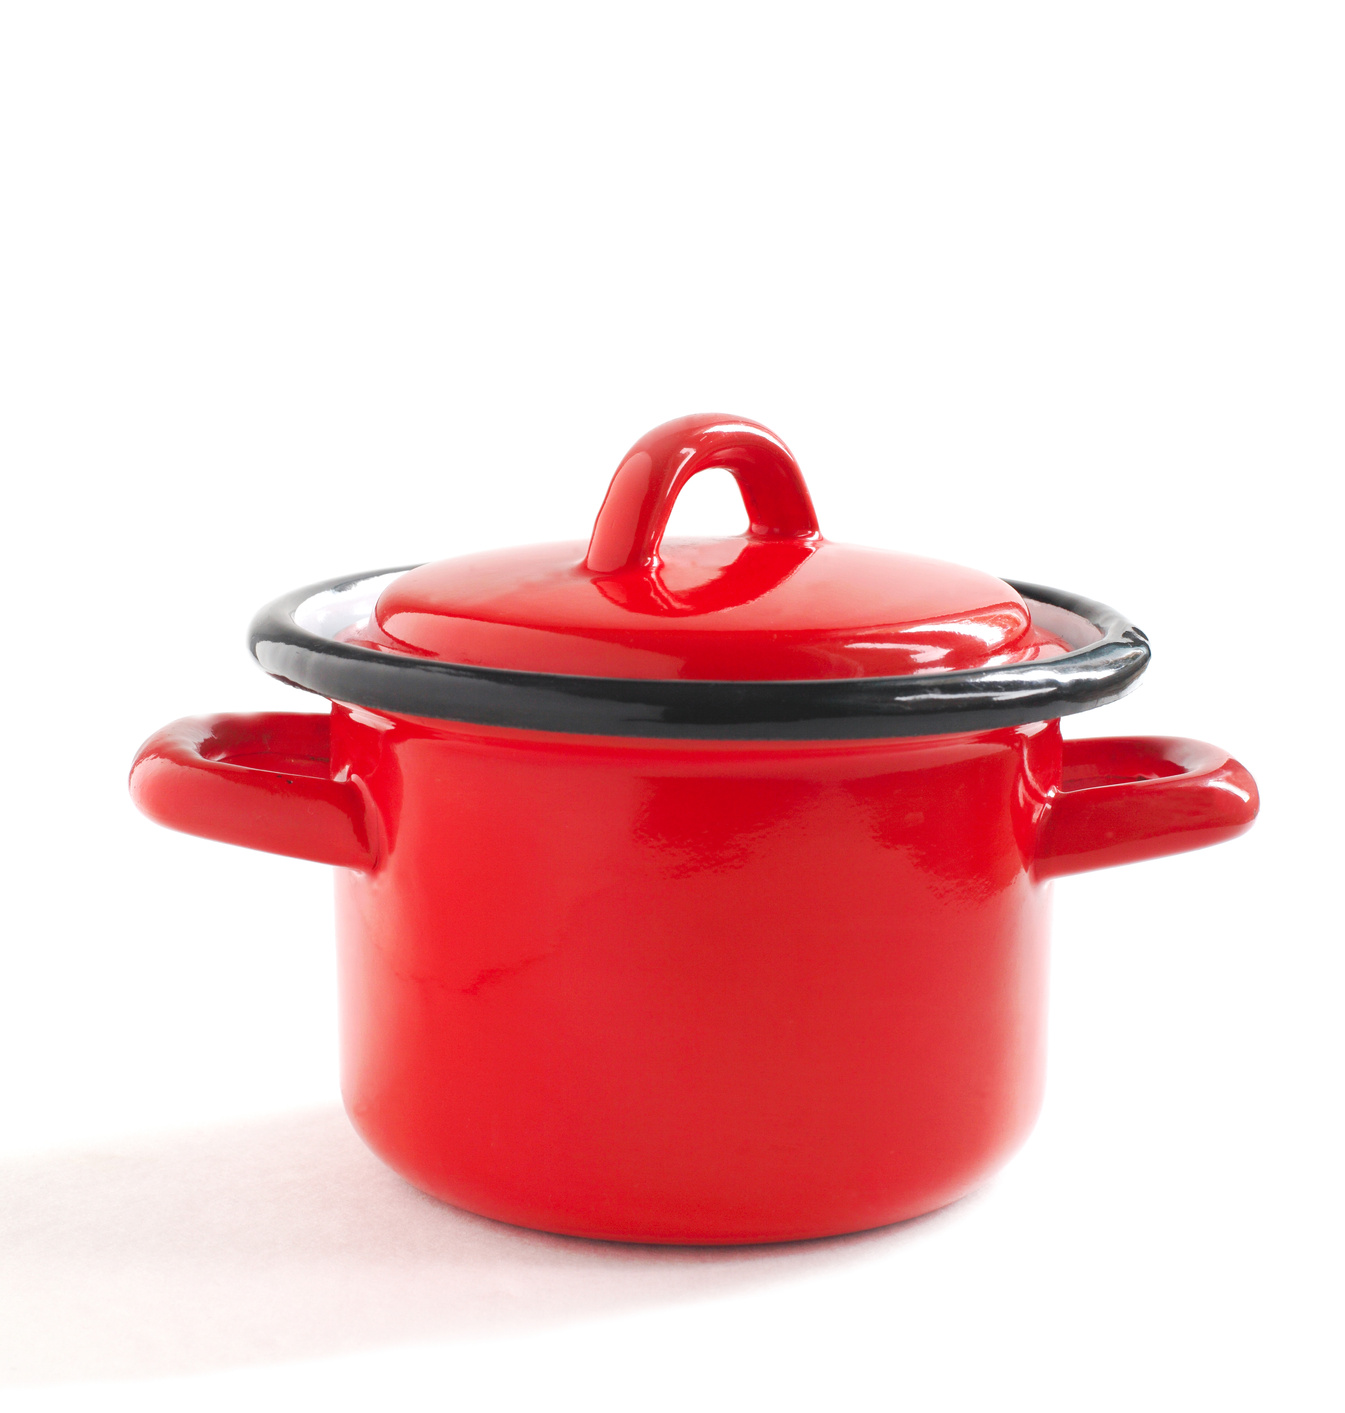 Red cooking pot, isolated on white